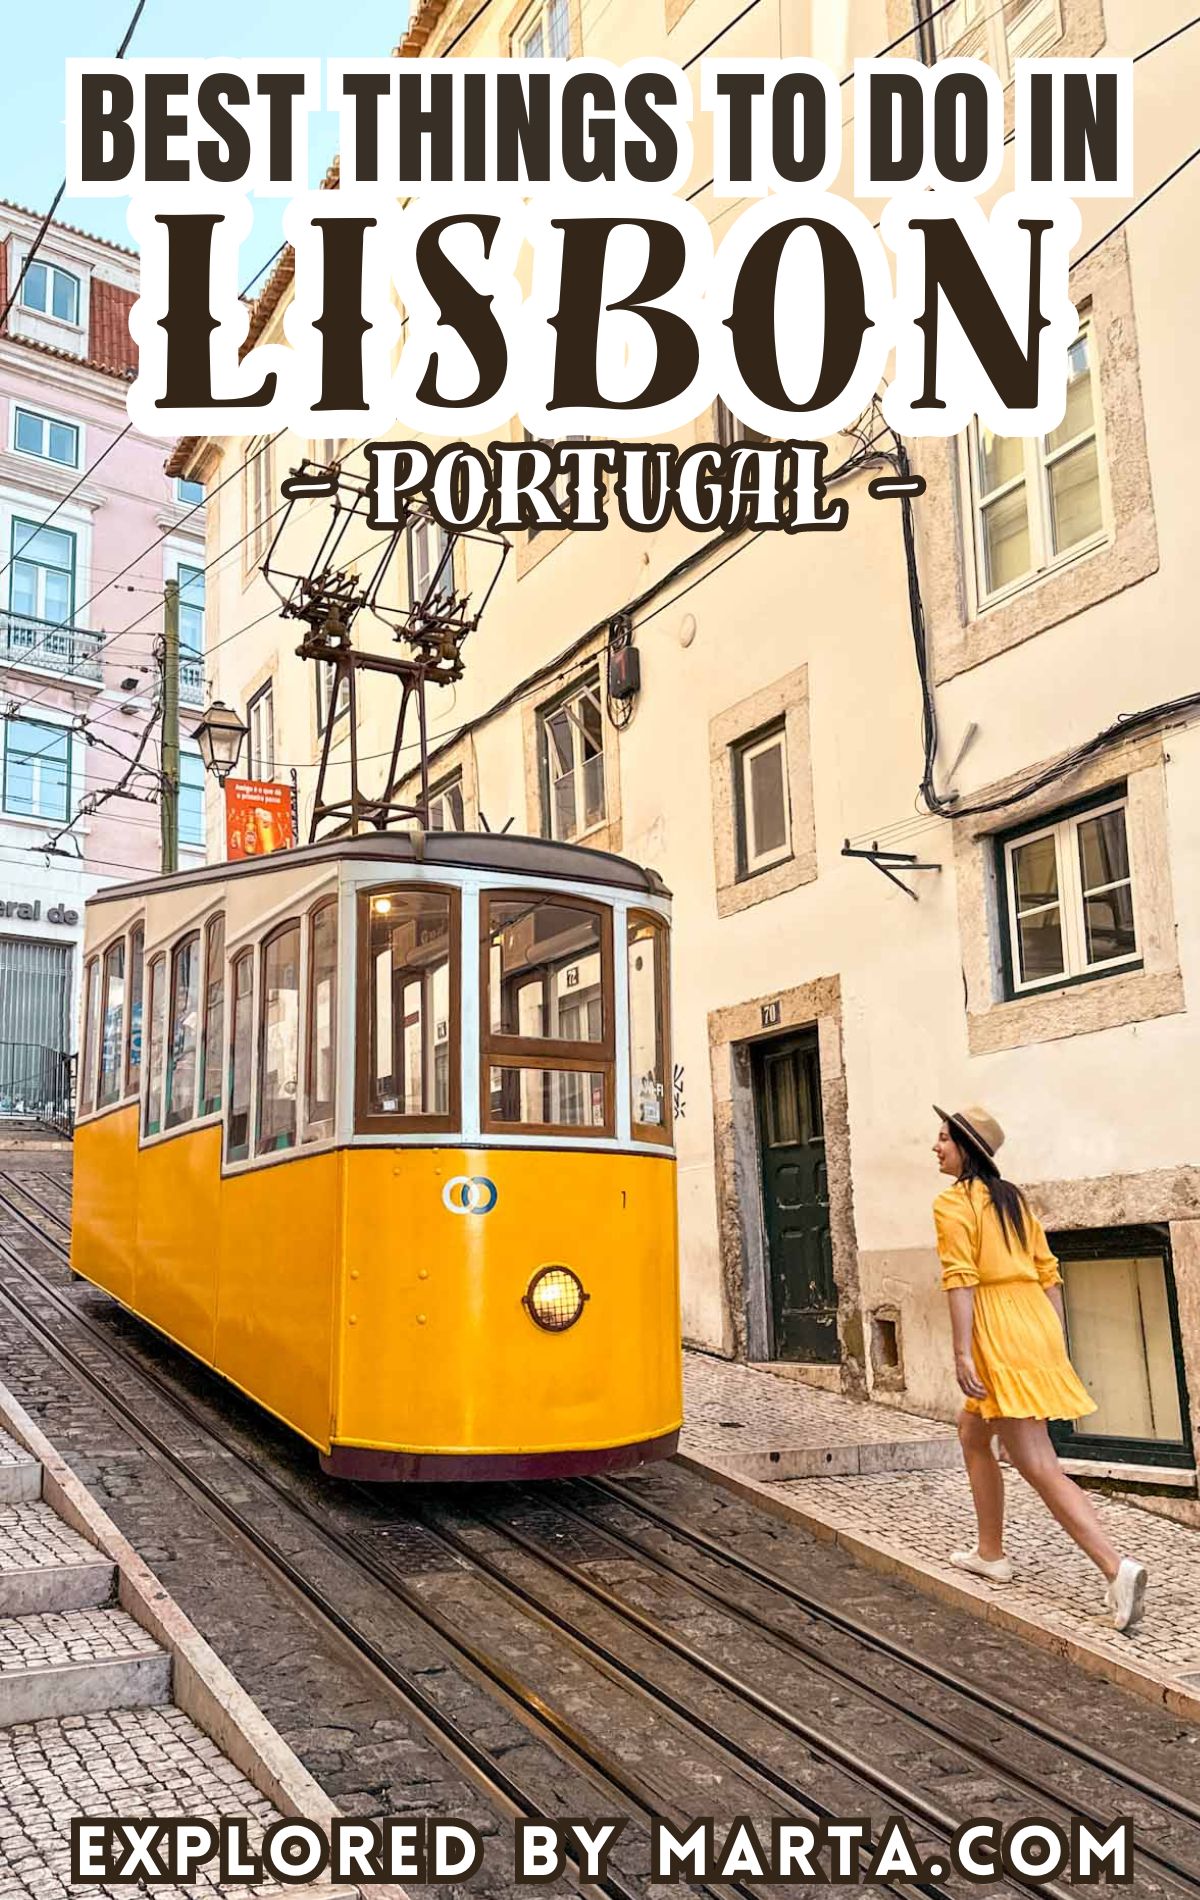 Lisbon bucket list - best things to do in Lisbon, Portugal 3-day itinerary